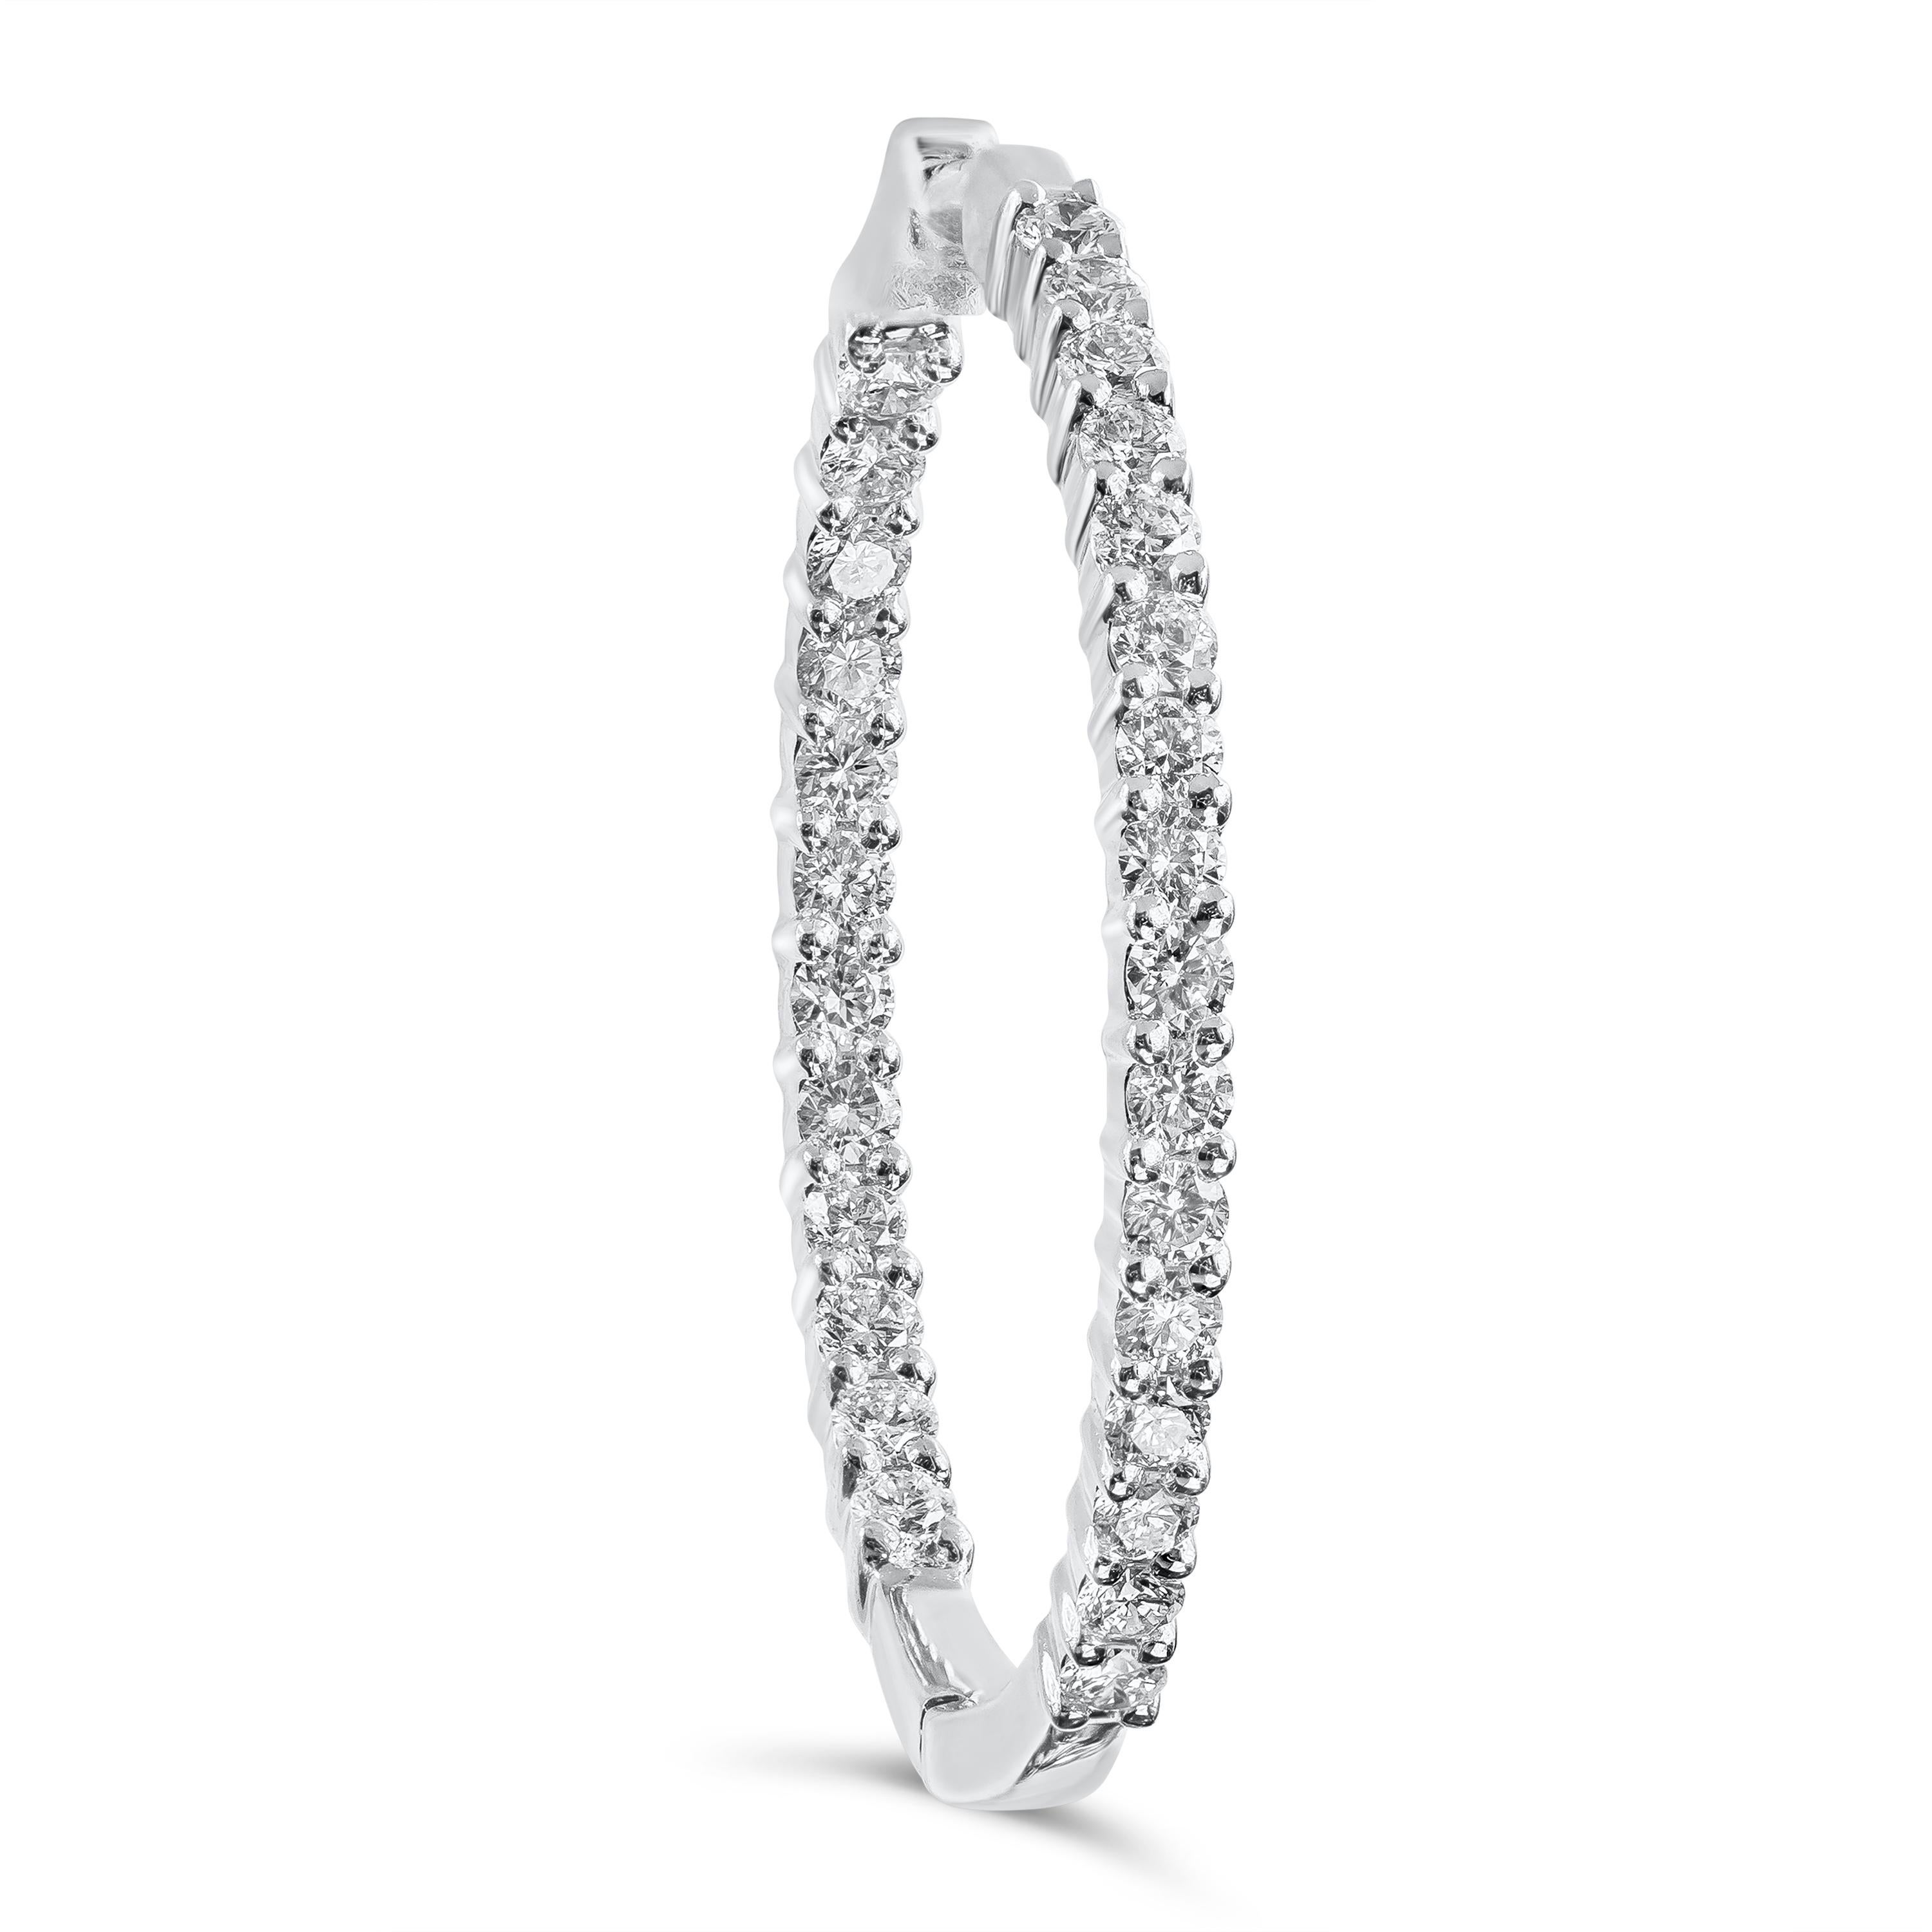 A timeless piece of jewelry featuring sparkling round diamonds aligned in a shared prong setting. Diamonds weigh 0.90 carats total. Setting made in 18 karat white gold. A magnificent piece.

Style available in different price ranges. Prices are